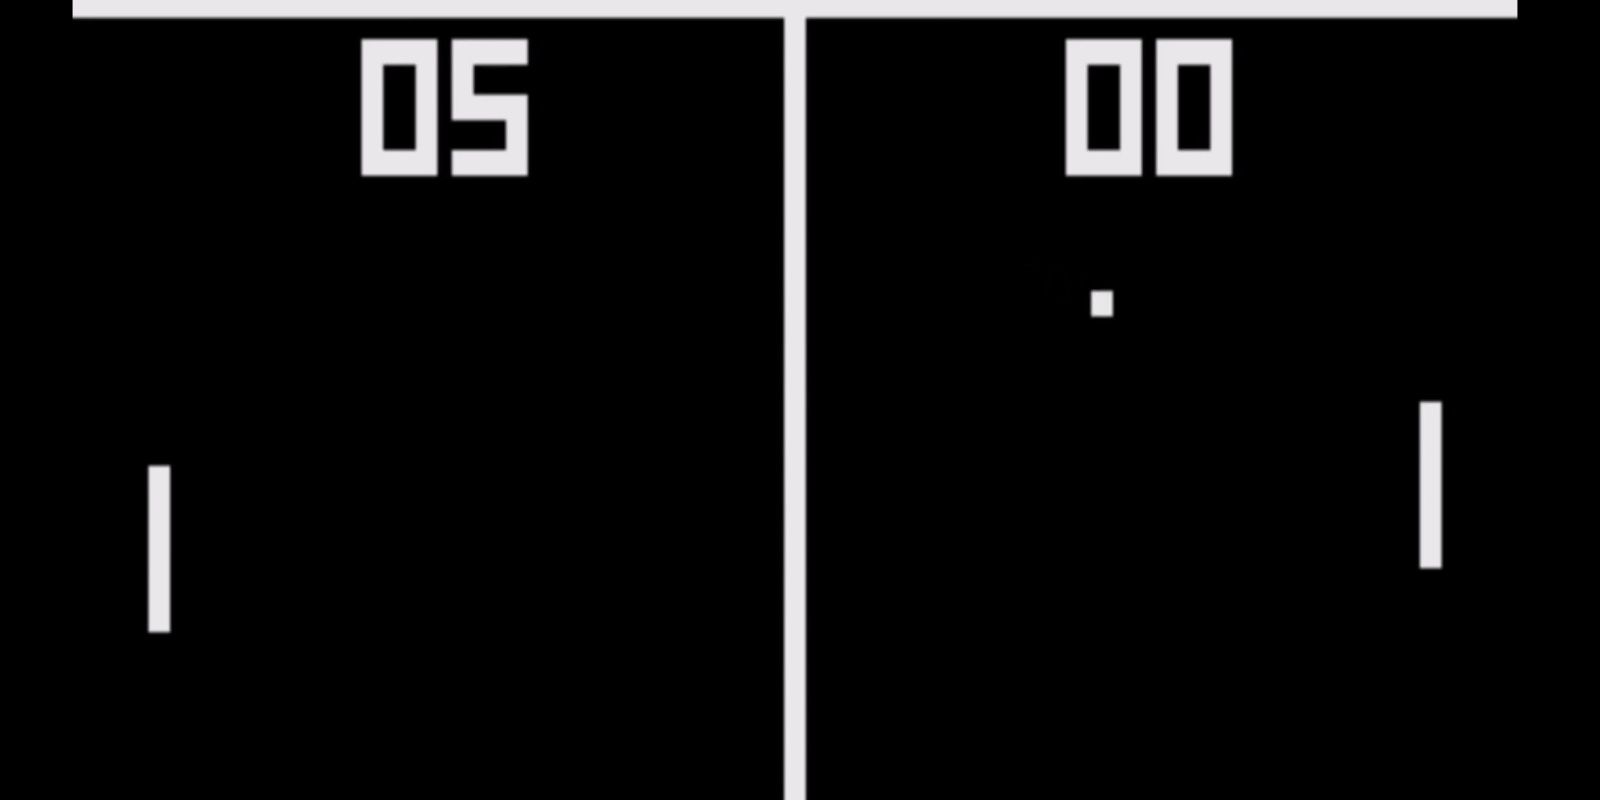 The game of Pong included in Mortal Kombat 2.